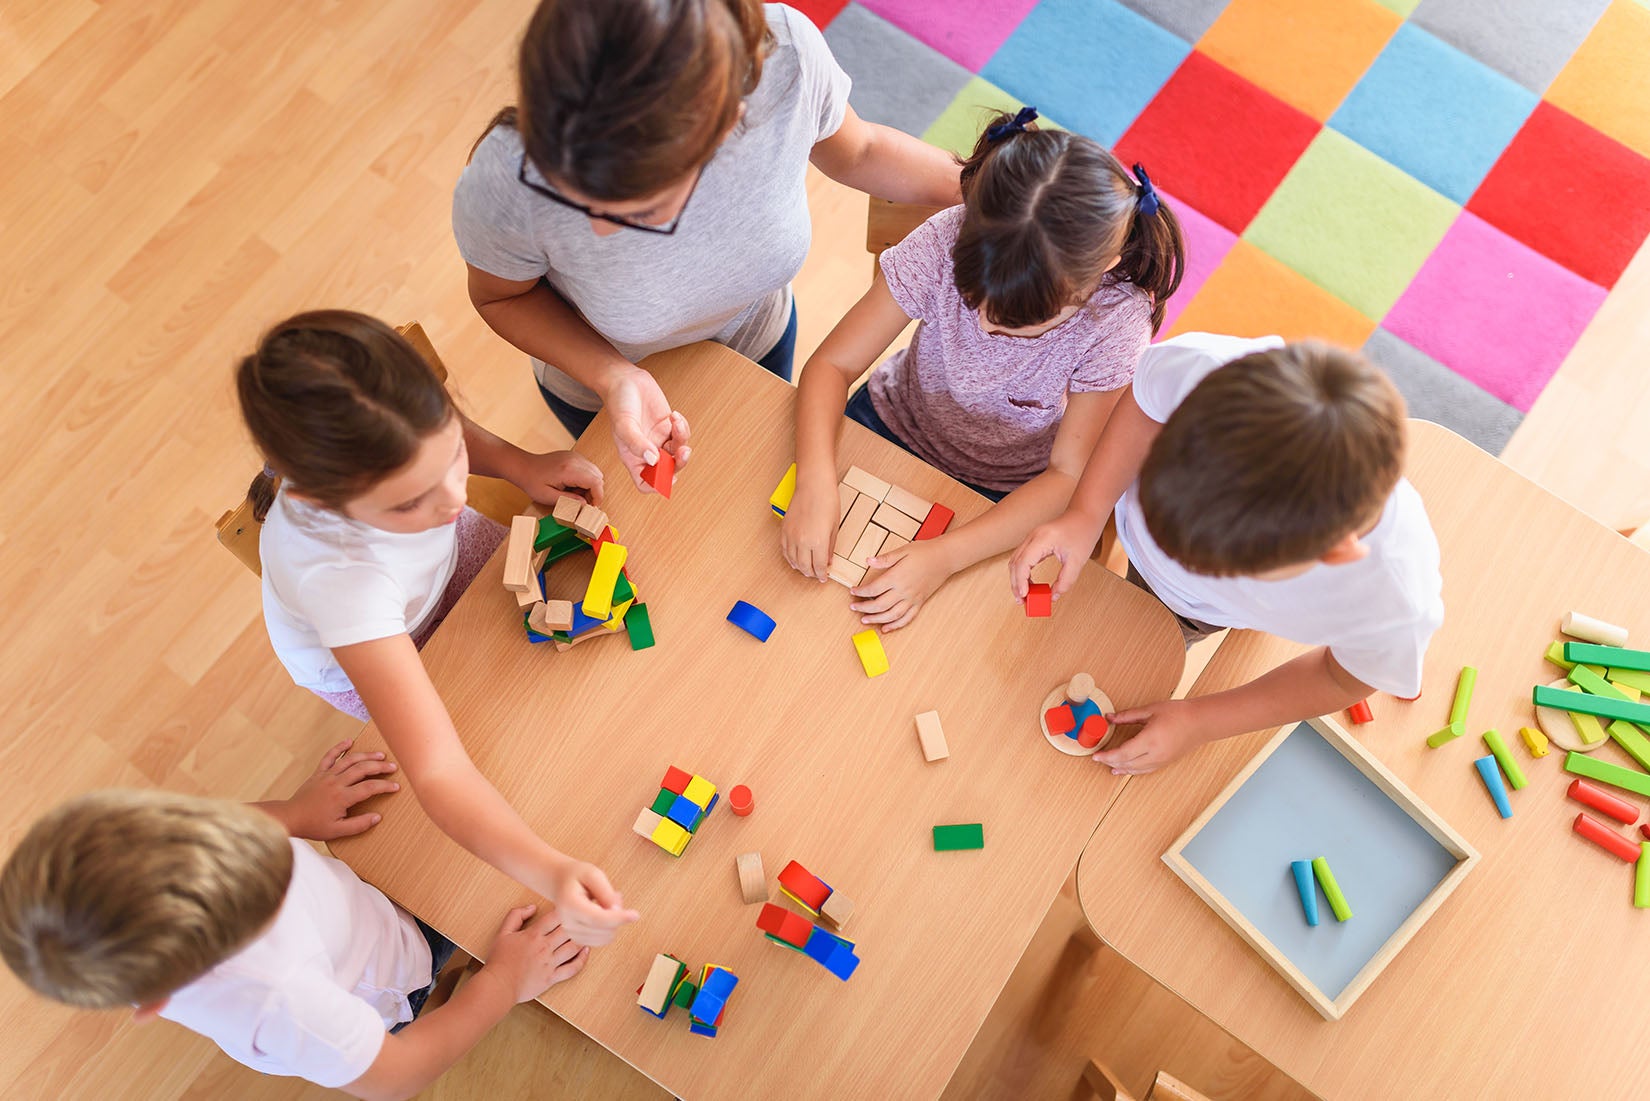 Children playing in classroom with building blocks